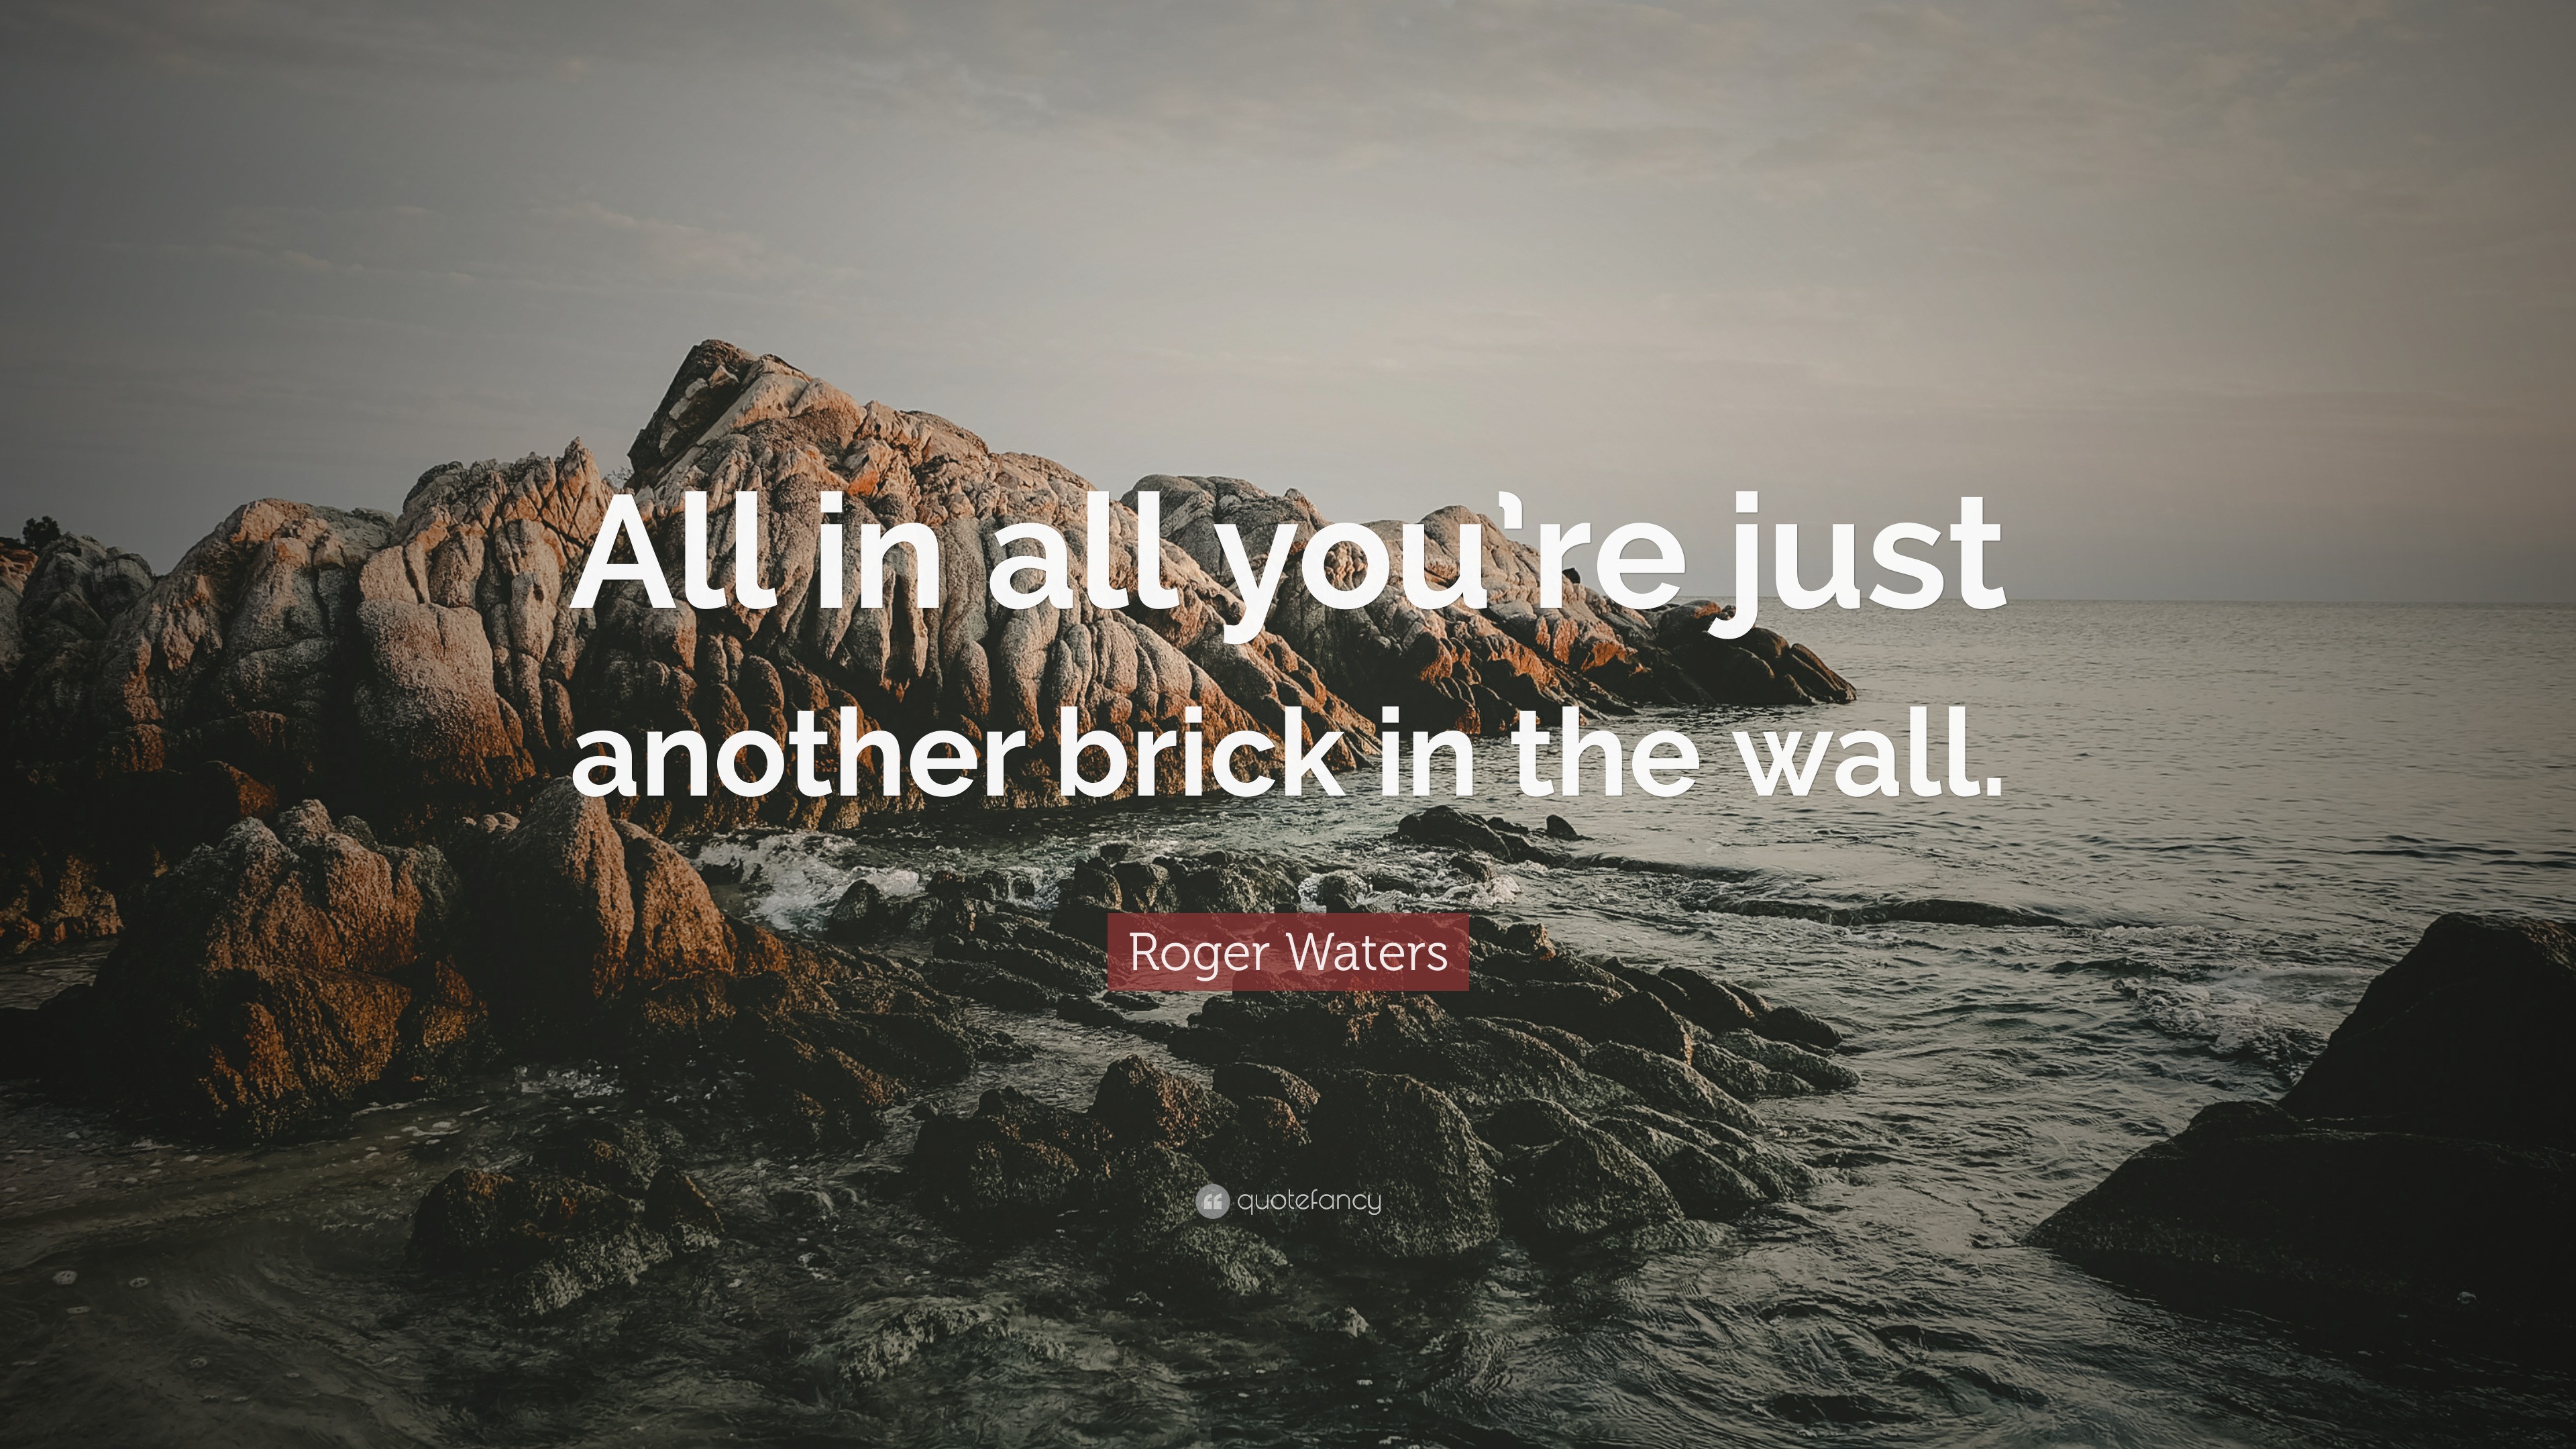 All In All You're Just Another Brick In The Wall on Tumblr